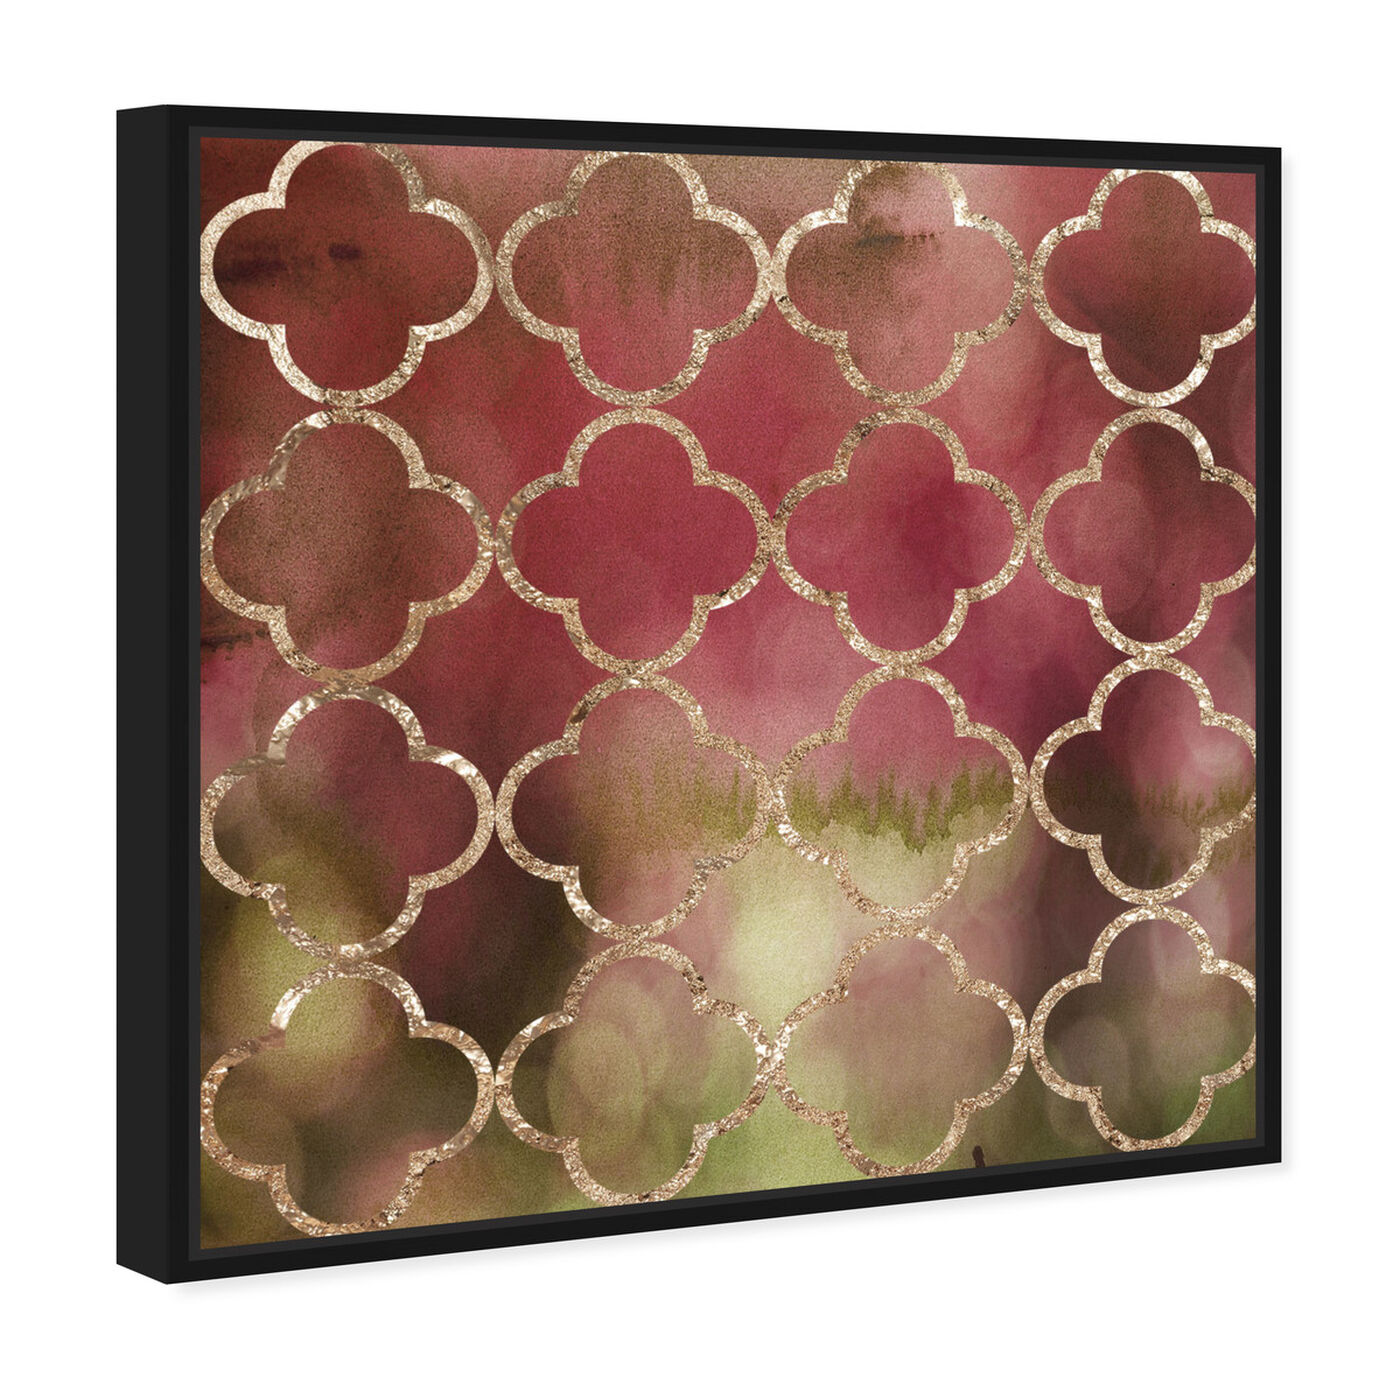 Angled view of Vineyard Land featuring abstract and patterns art.